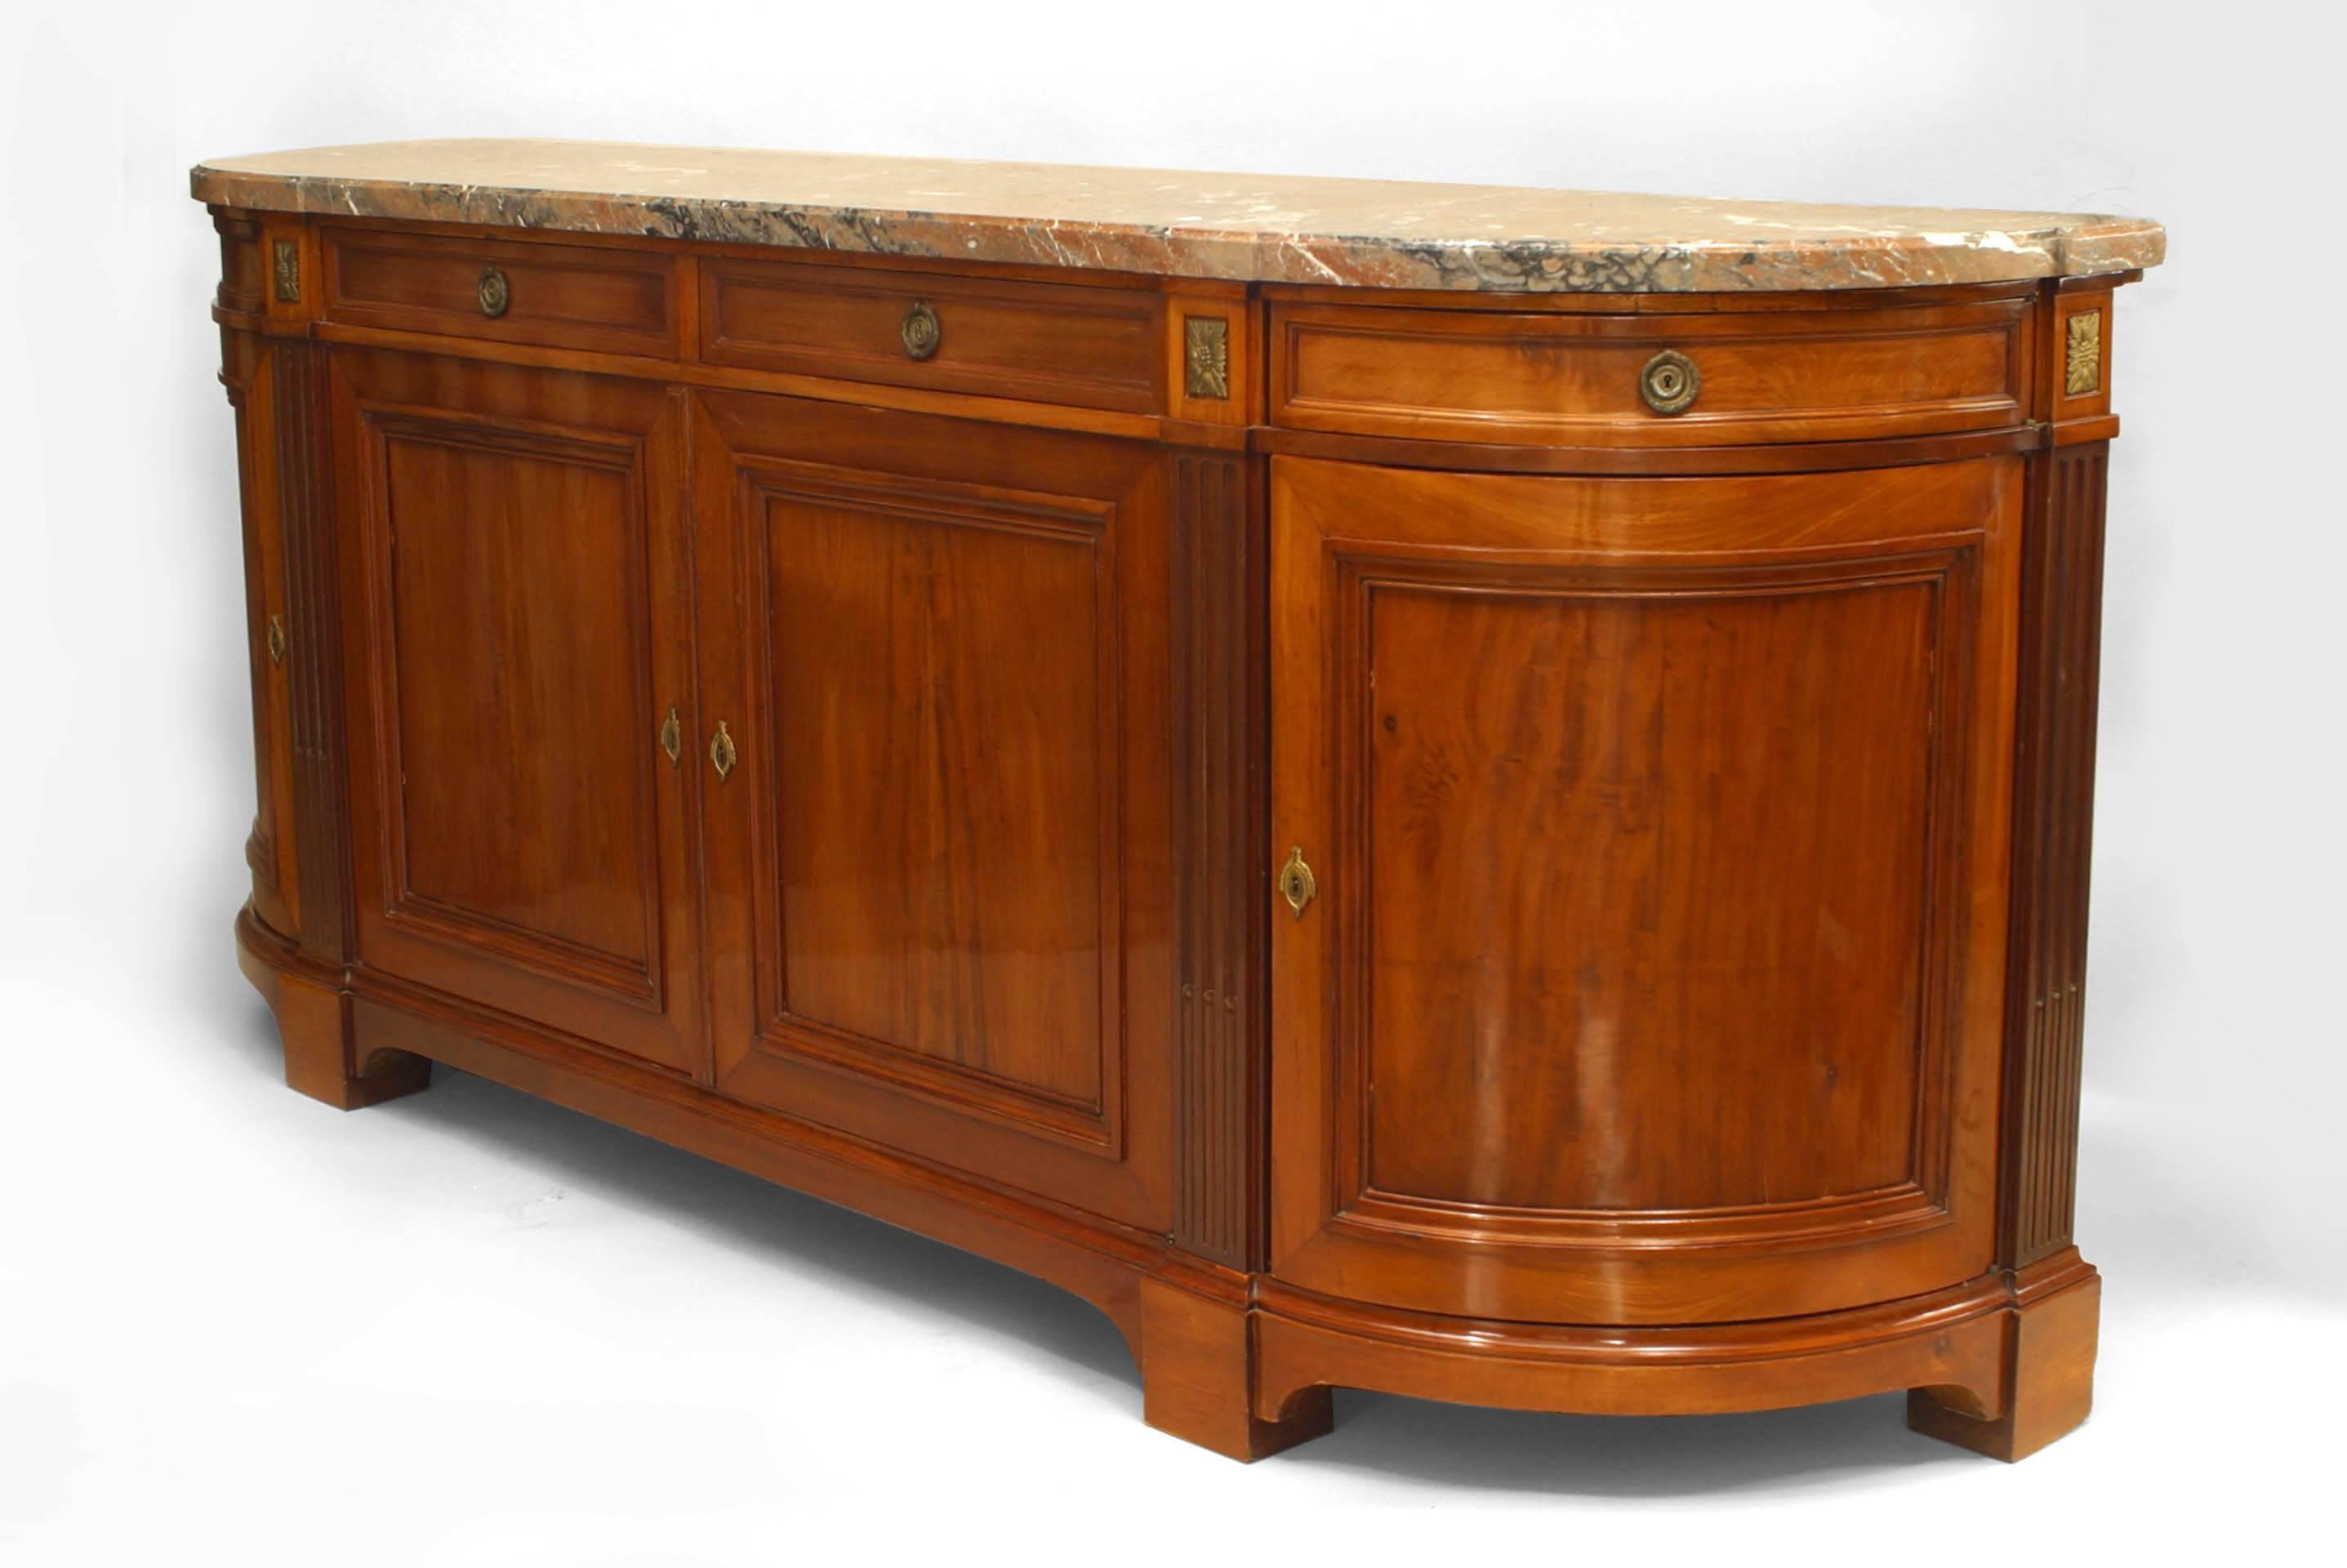 French Victorian walnut buffet cabinet with bronze mounts and 4 doors below 4 drawers with a 